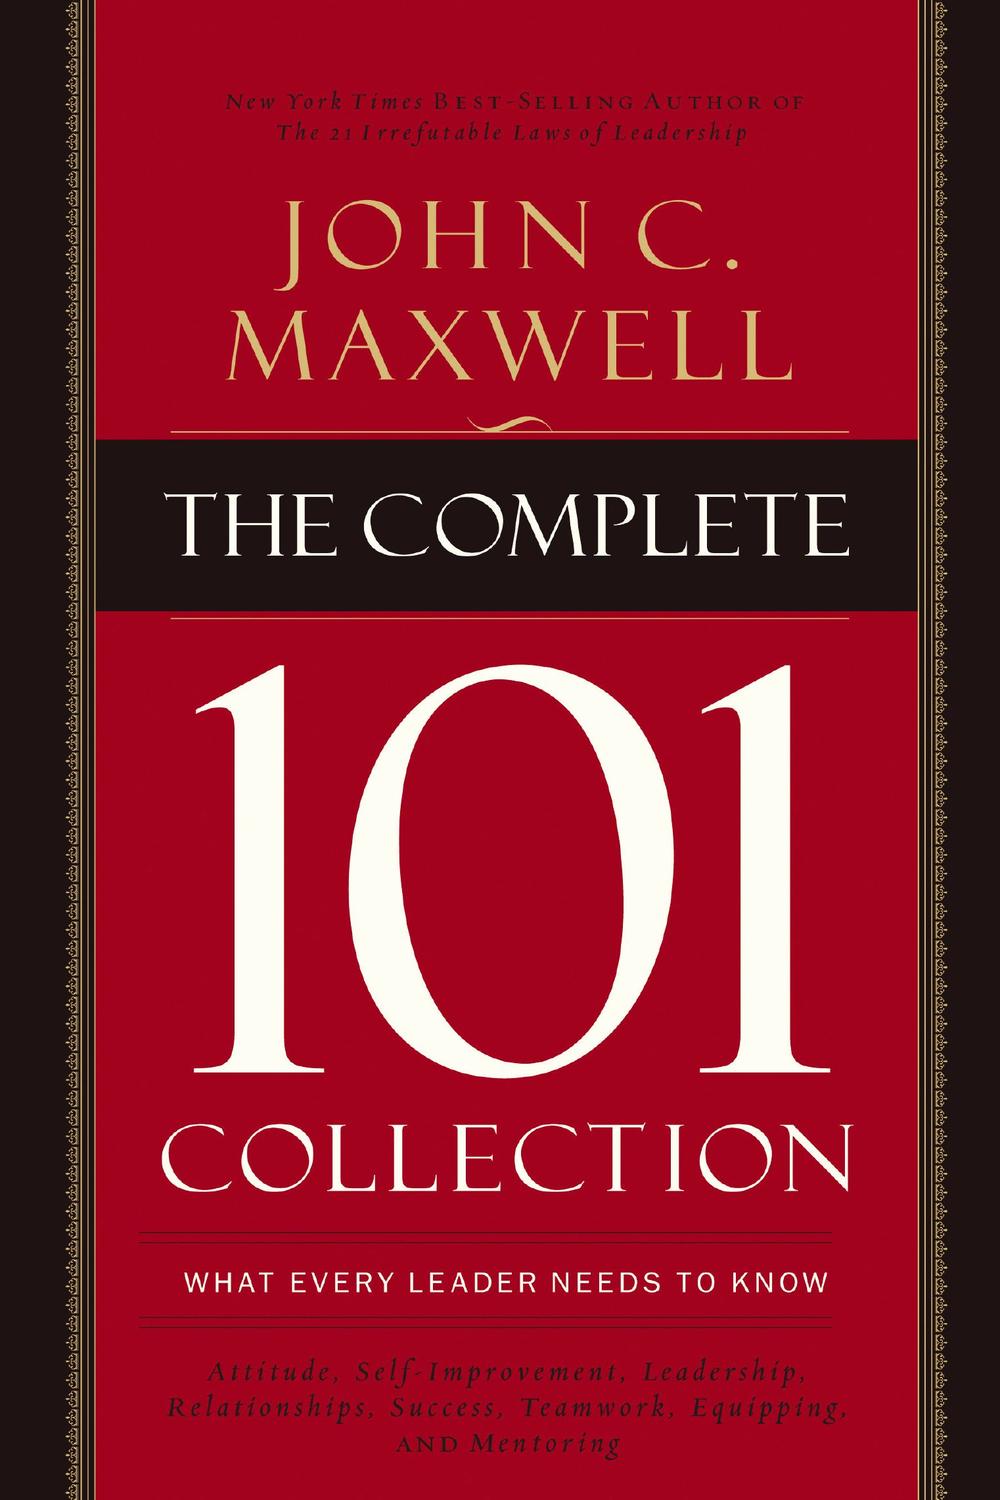 The Complete 101 Collection - John C. Maxwell